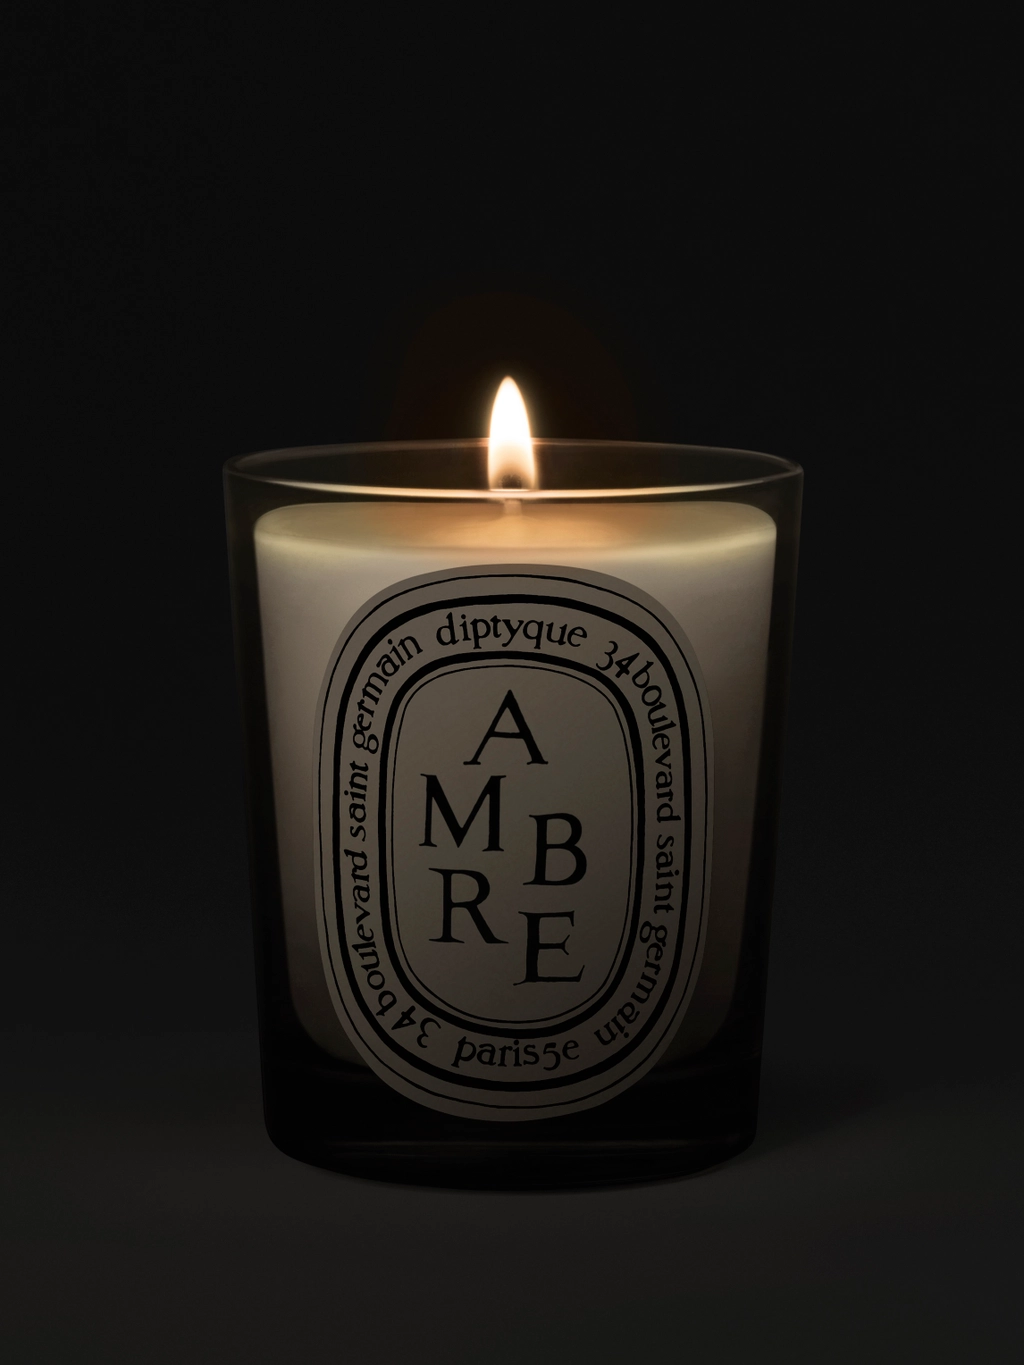 https://www.diptyqueparis.com/media/catalog/product/d/i/diptyque-ambre-amber-candle-190g-ab-2.jpg?quality=100&bg-color=255,255,255&fit=bounds&height=&width=&format=webp&width=1024&quality=90